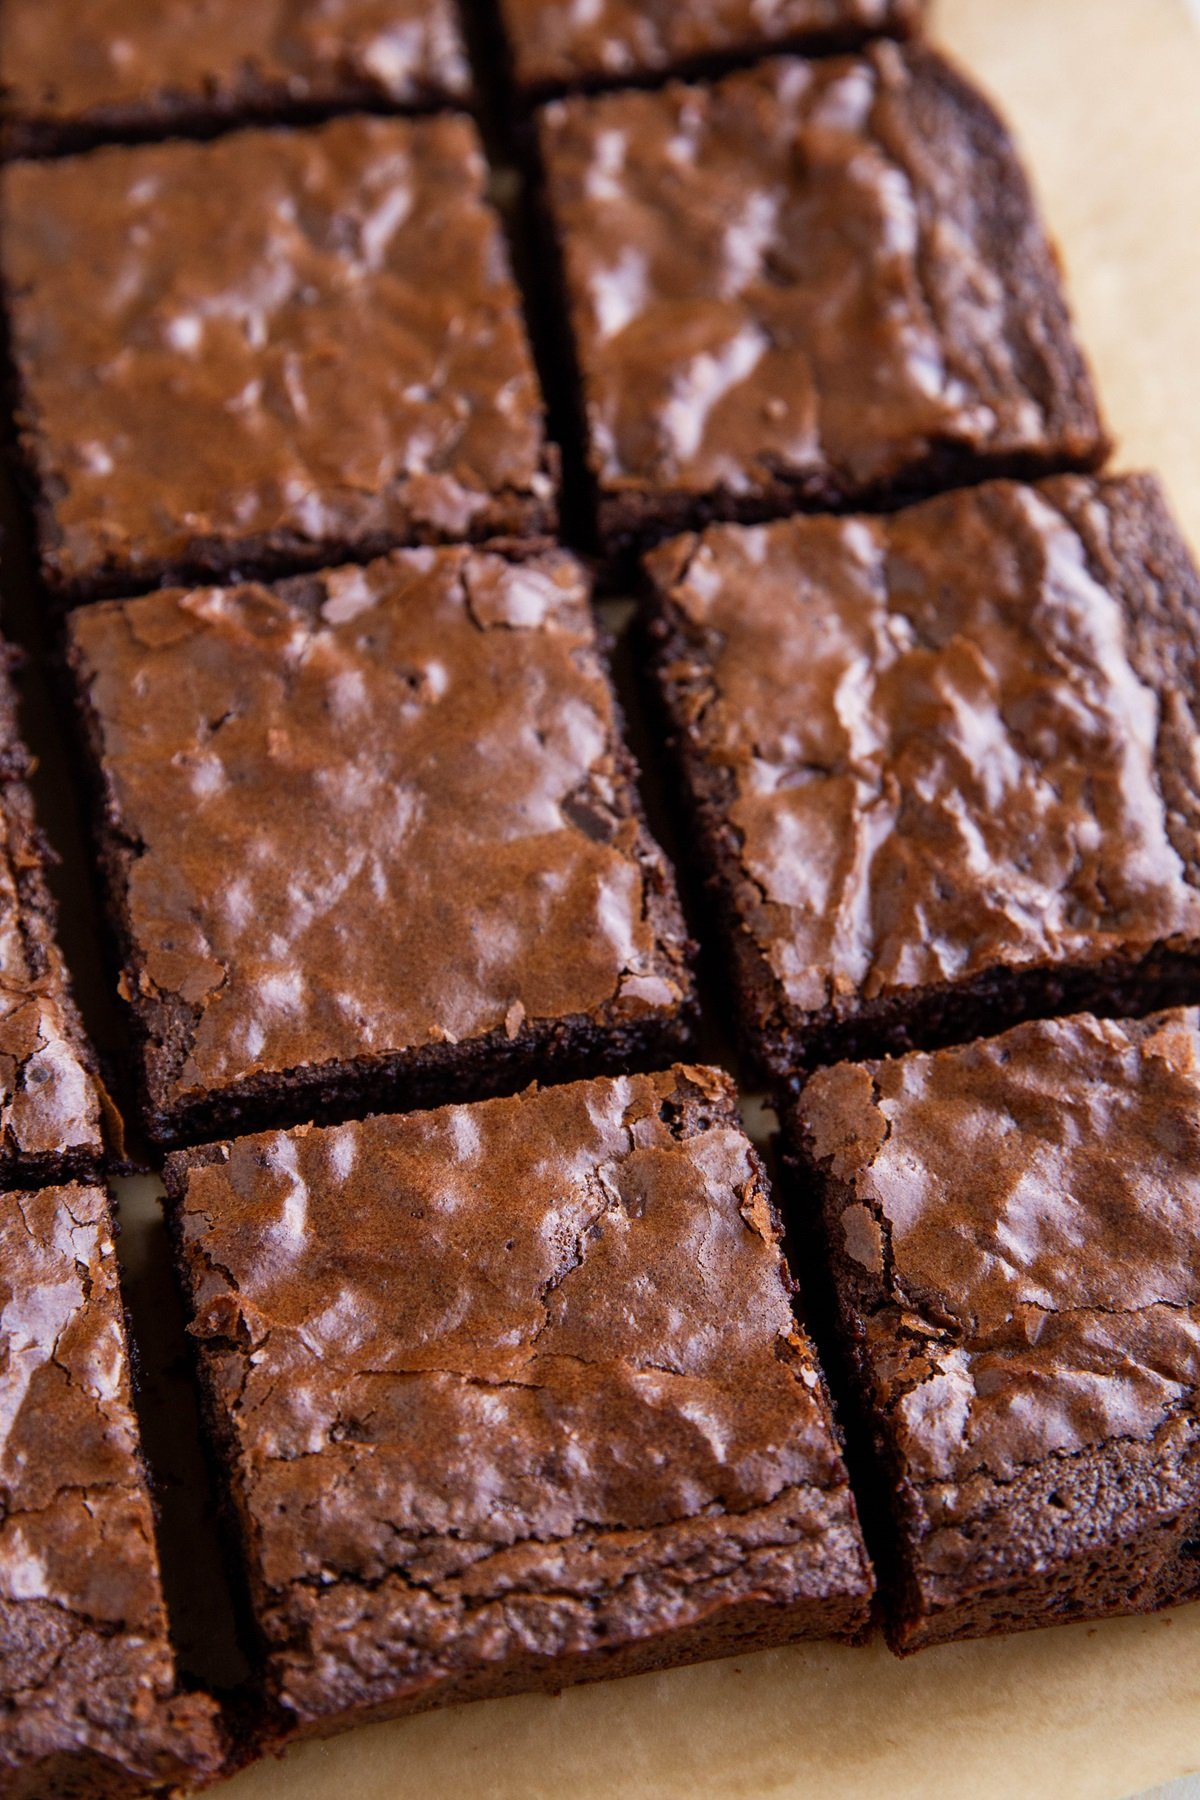 Gluten-free brownies on a sheet of parchment paper, cut into individual slices.